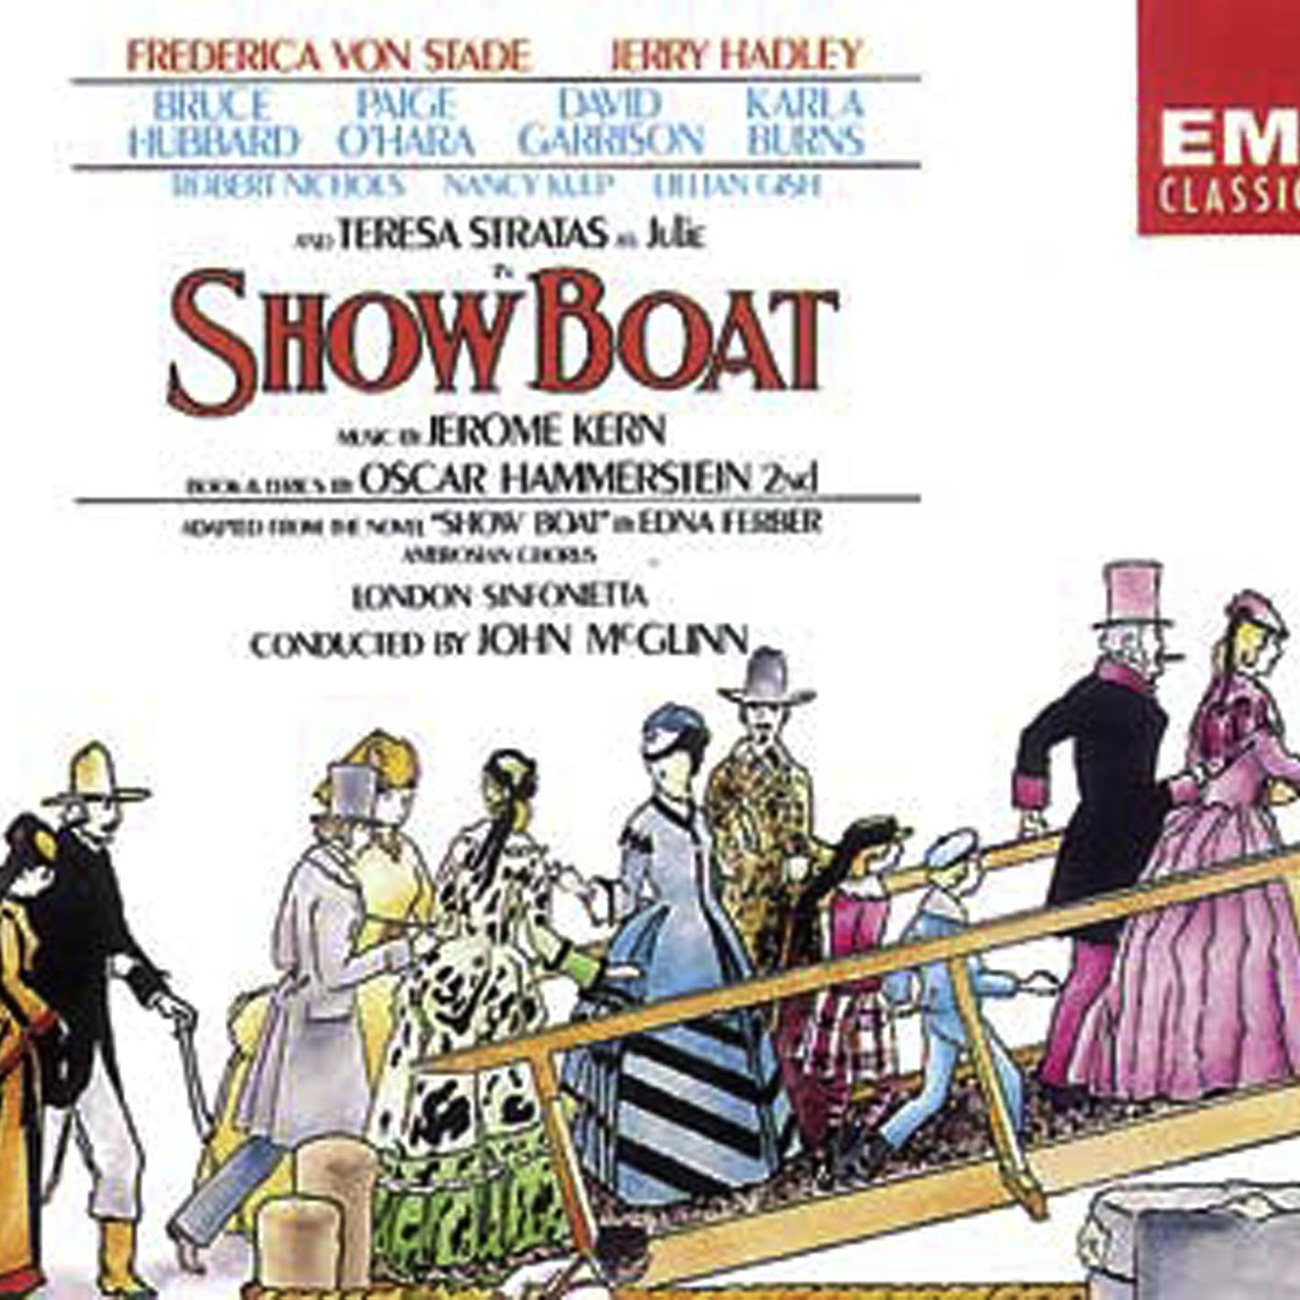 Show Boat, ACT 2, Scene 4: 'All right, Jake - Call 'em at twelve' to 'I'm ready Jake, whenever you are.'